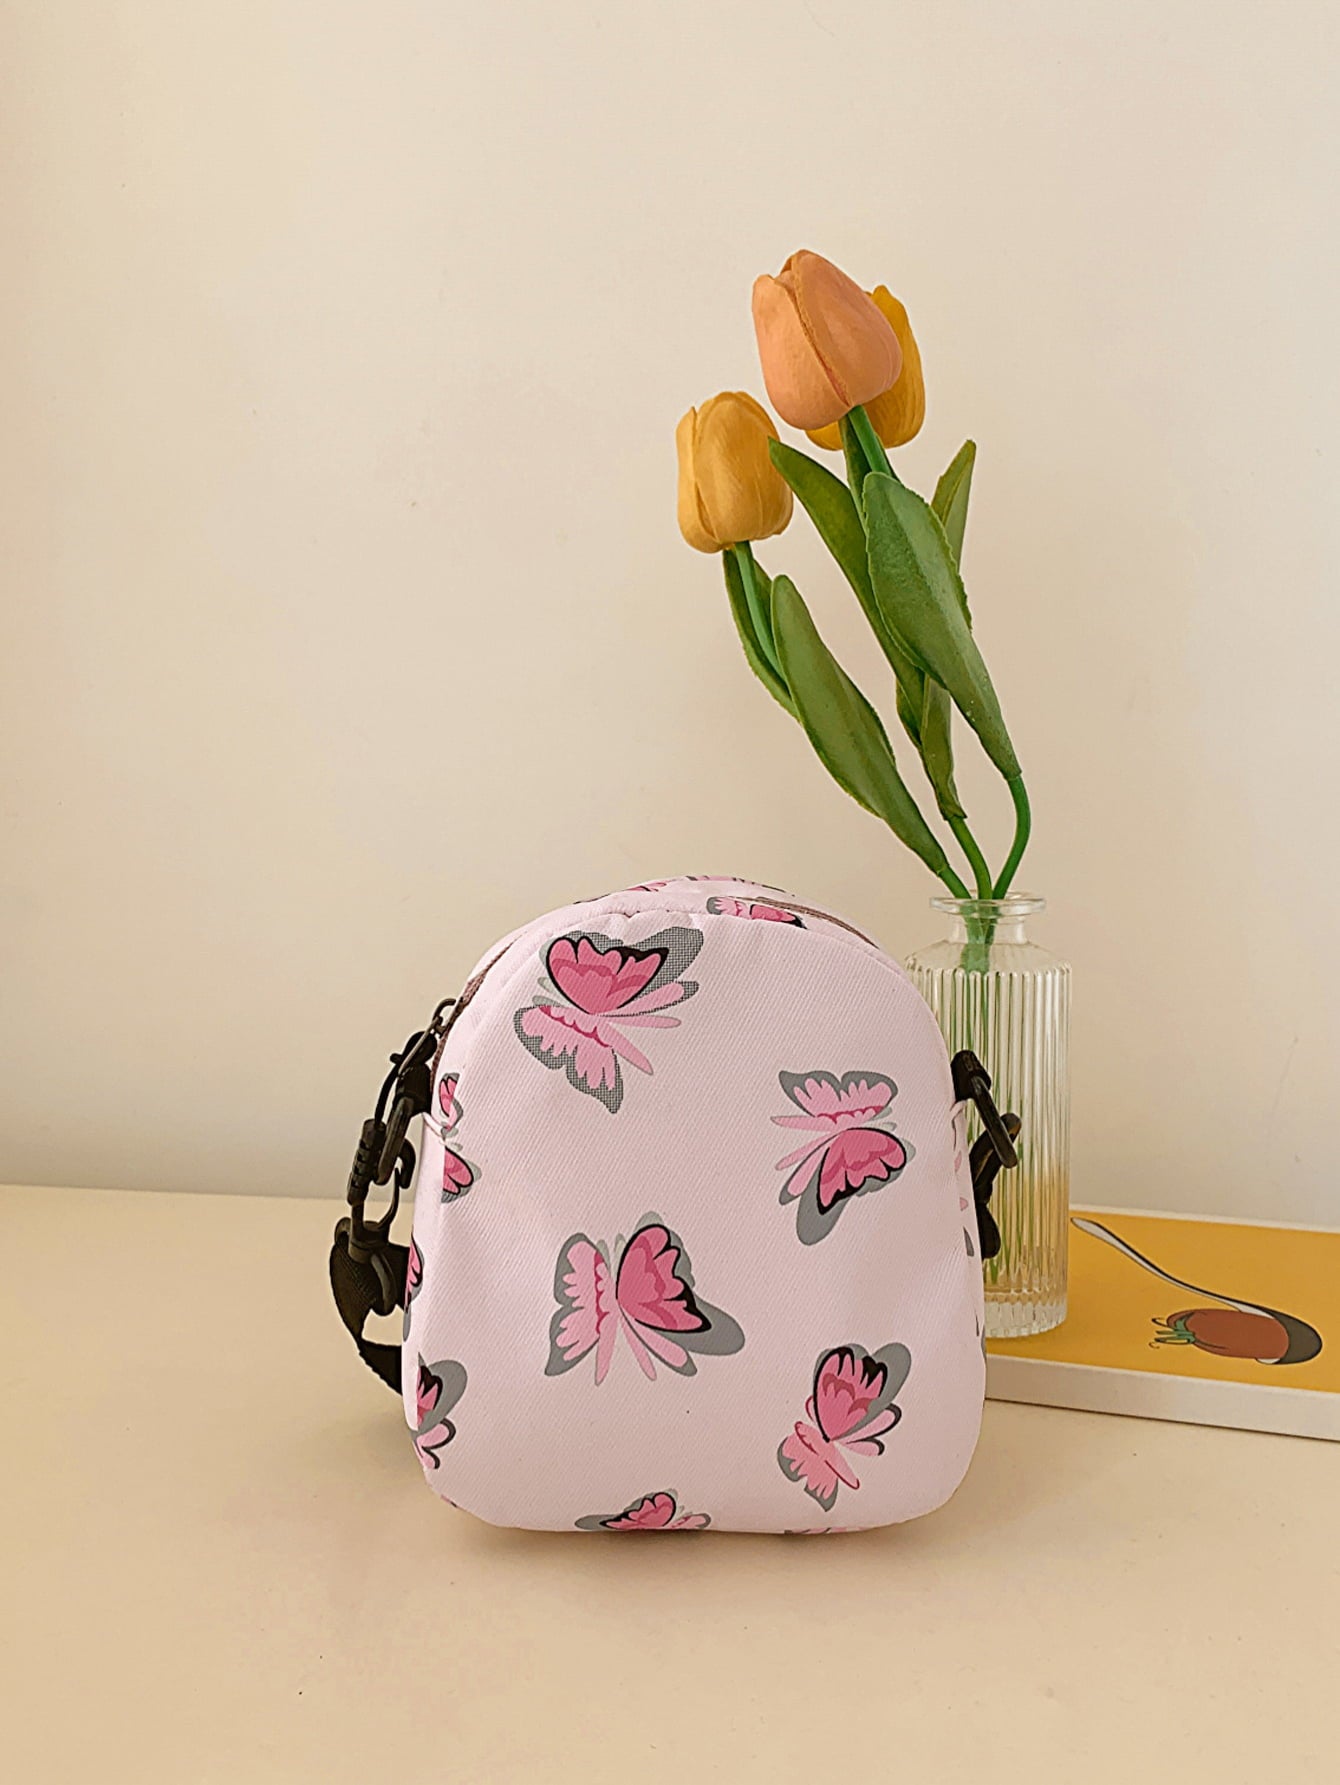 butterfly print polyester shoulder handbag, pink with pink butterflies, back view, on counter with yellow tulips